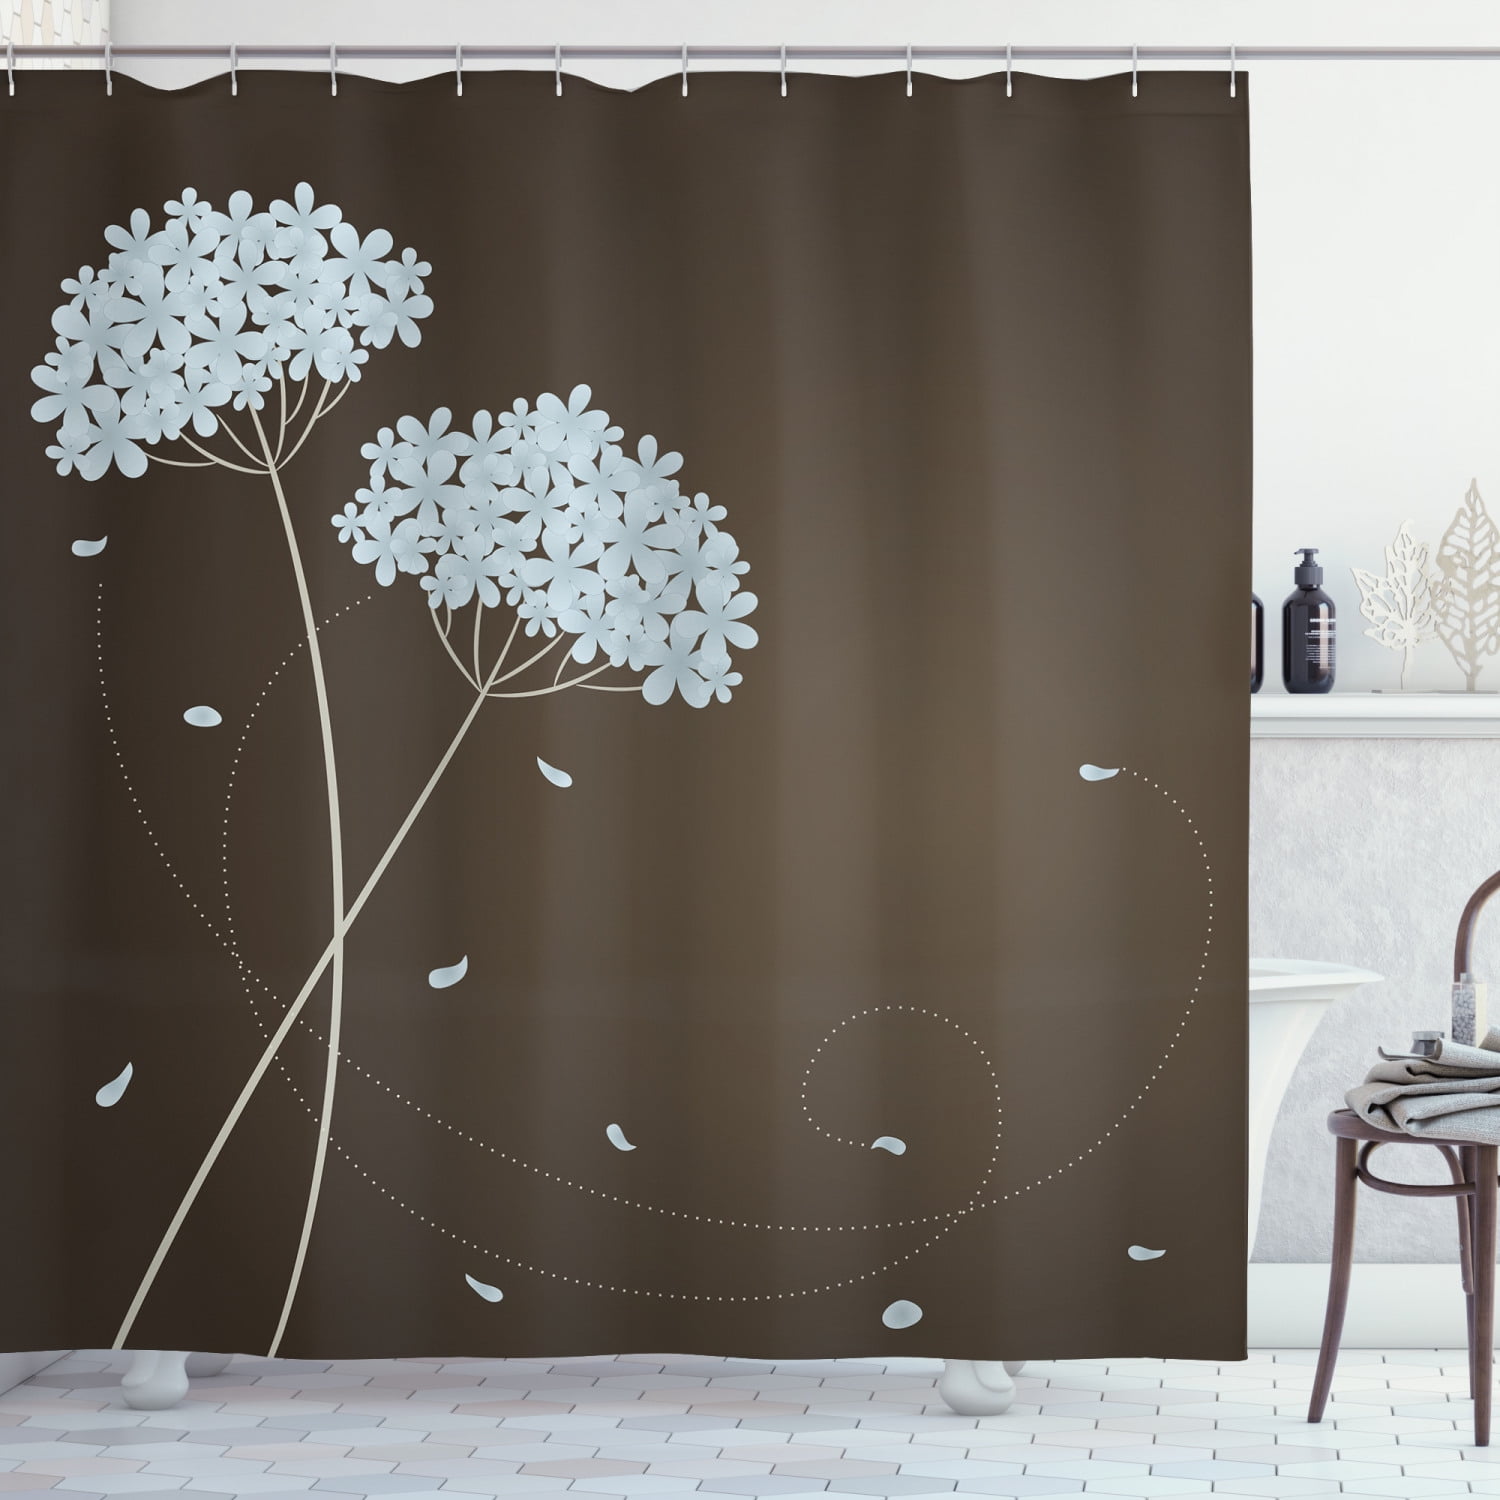 Old Car With Glassland And Sky Bathroom Fabric Shower Curtain Set 71Inch Long 